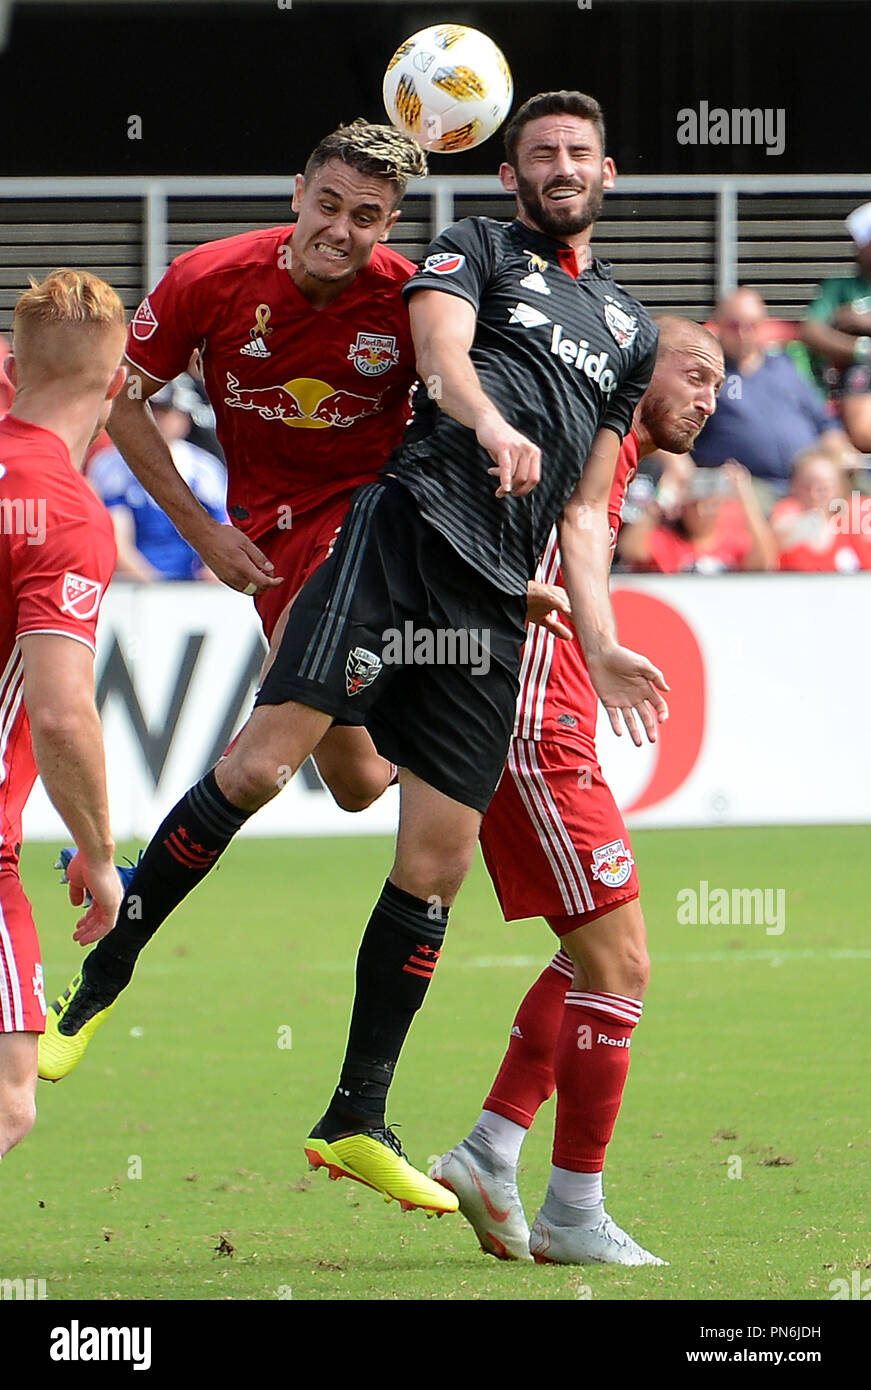 Washington, DC, USA. 16th Sep, 2018. 20180916 - D.C. United defender STEVE BIRNBAUM (15) battles for a head ball against New York Red Bulls defender AARON LONG (33), left, and New York Red Bulls midfielder DANIEL ROYER (77), back, in the first half at Audi Field in Washington. Credit: Chuck Myers/ZUMA Wire/Alamy Live News Stock Photo